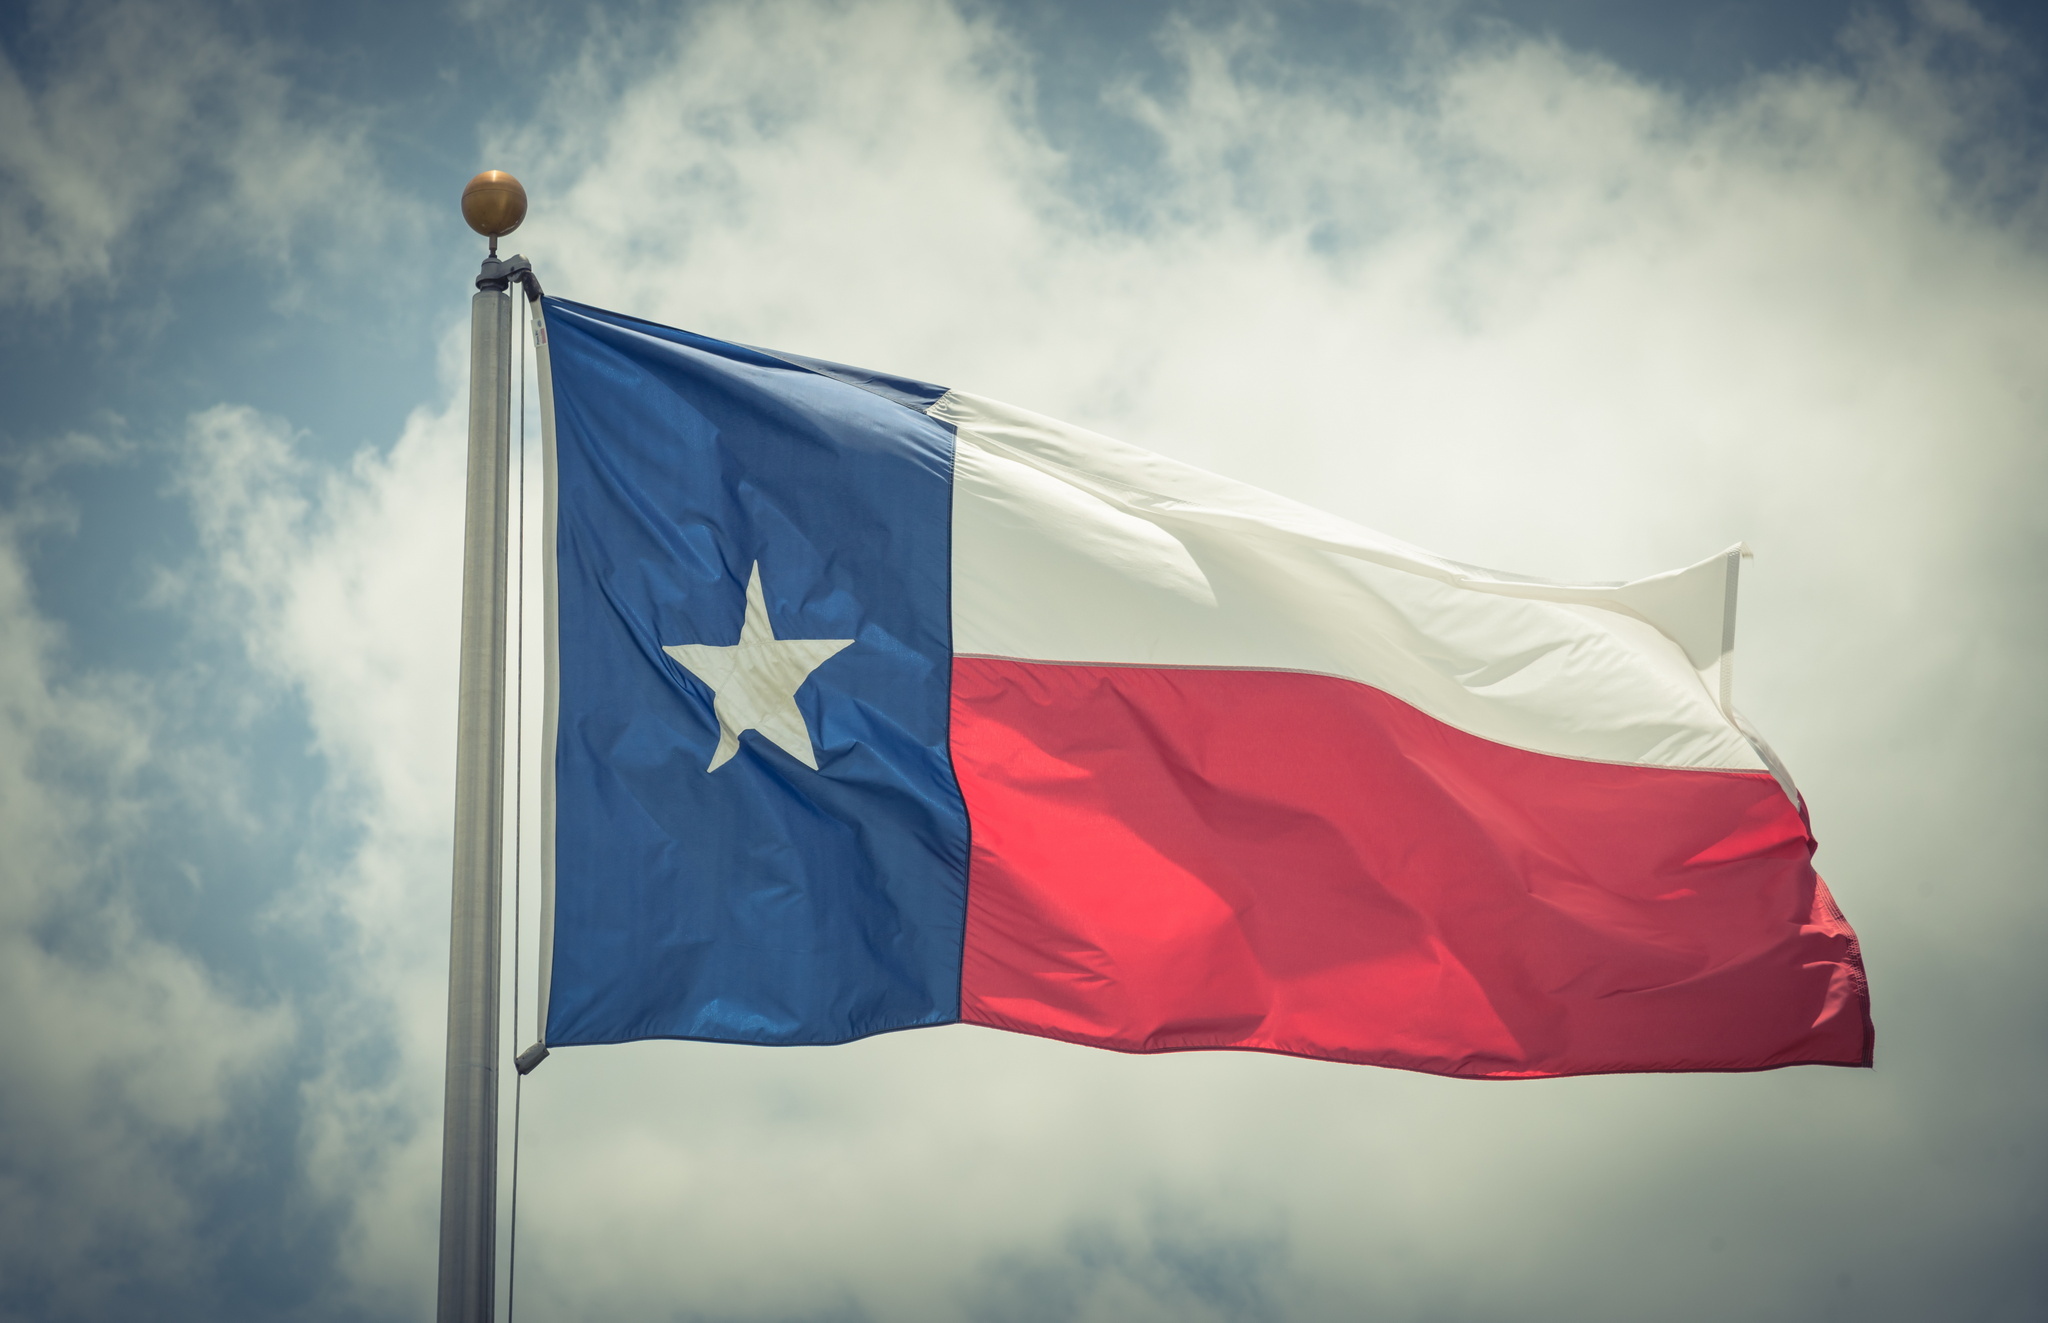 Texas Flag blowing in the wind with cloudy skies behind.